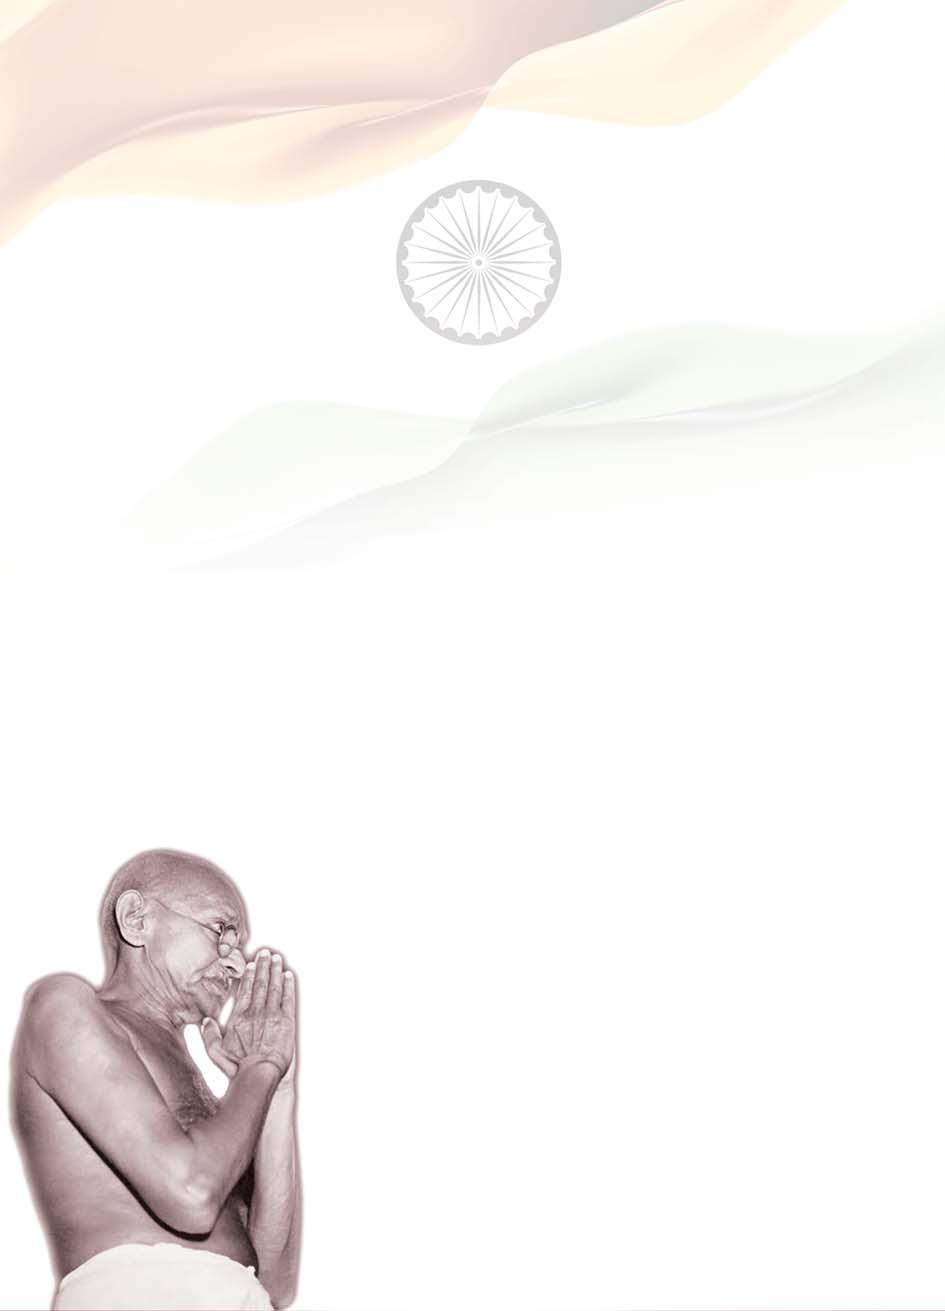 Symbol of hope for the downtrodden India Long live Mahatma Gandhi, the symbol of hope for the downtrodden India. You ve intoxicated the world with your charm, binding the world with a bond of love.